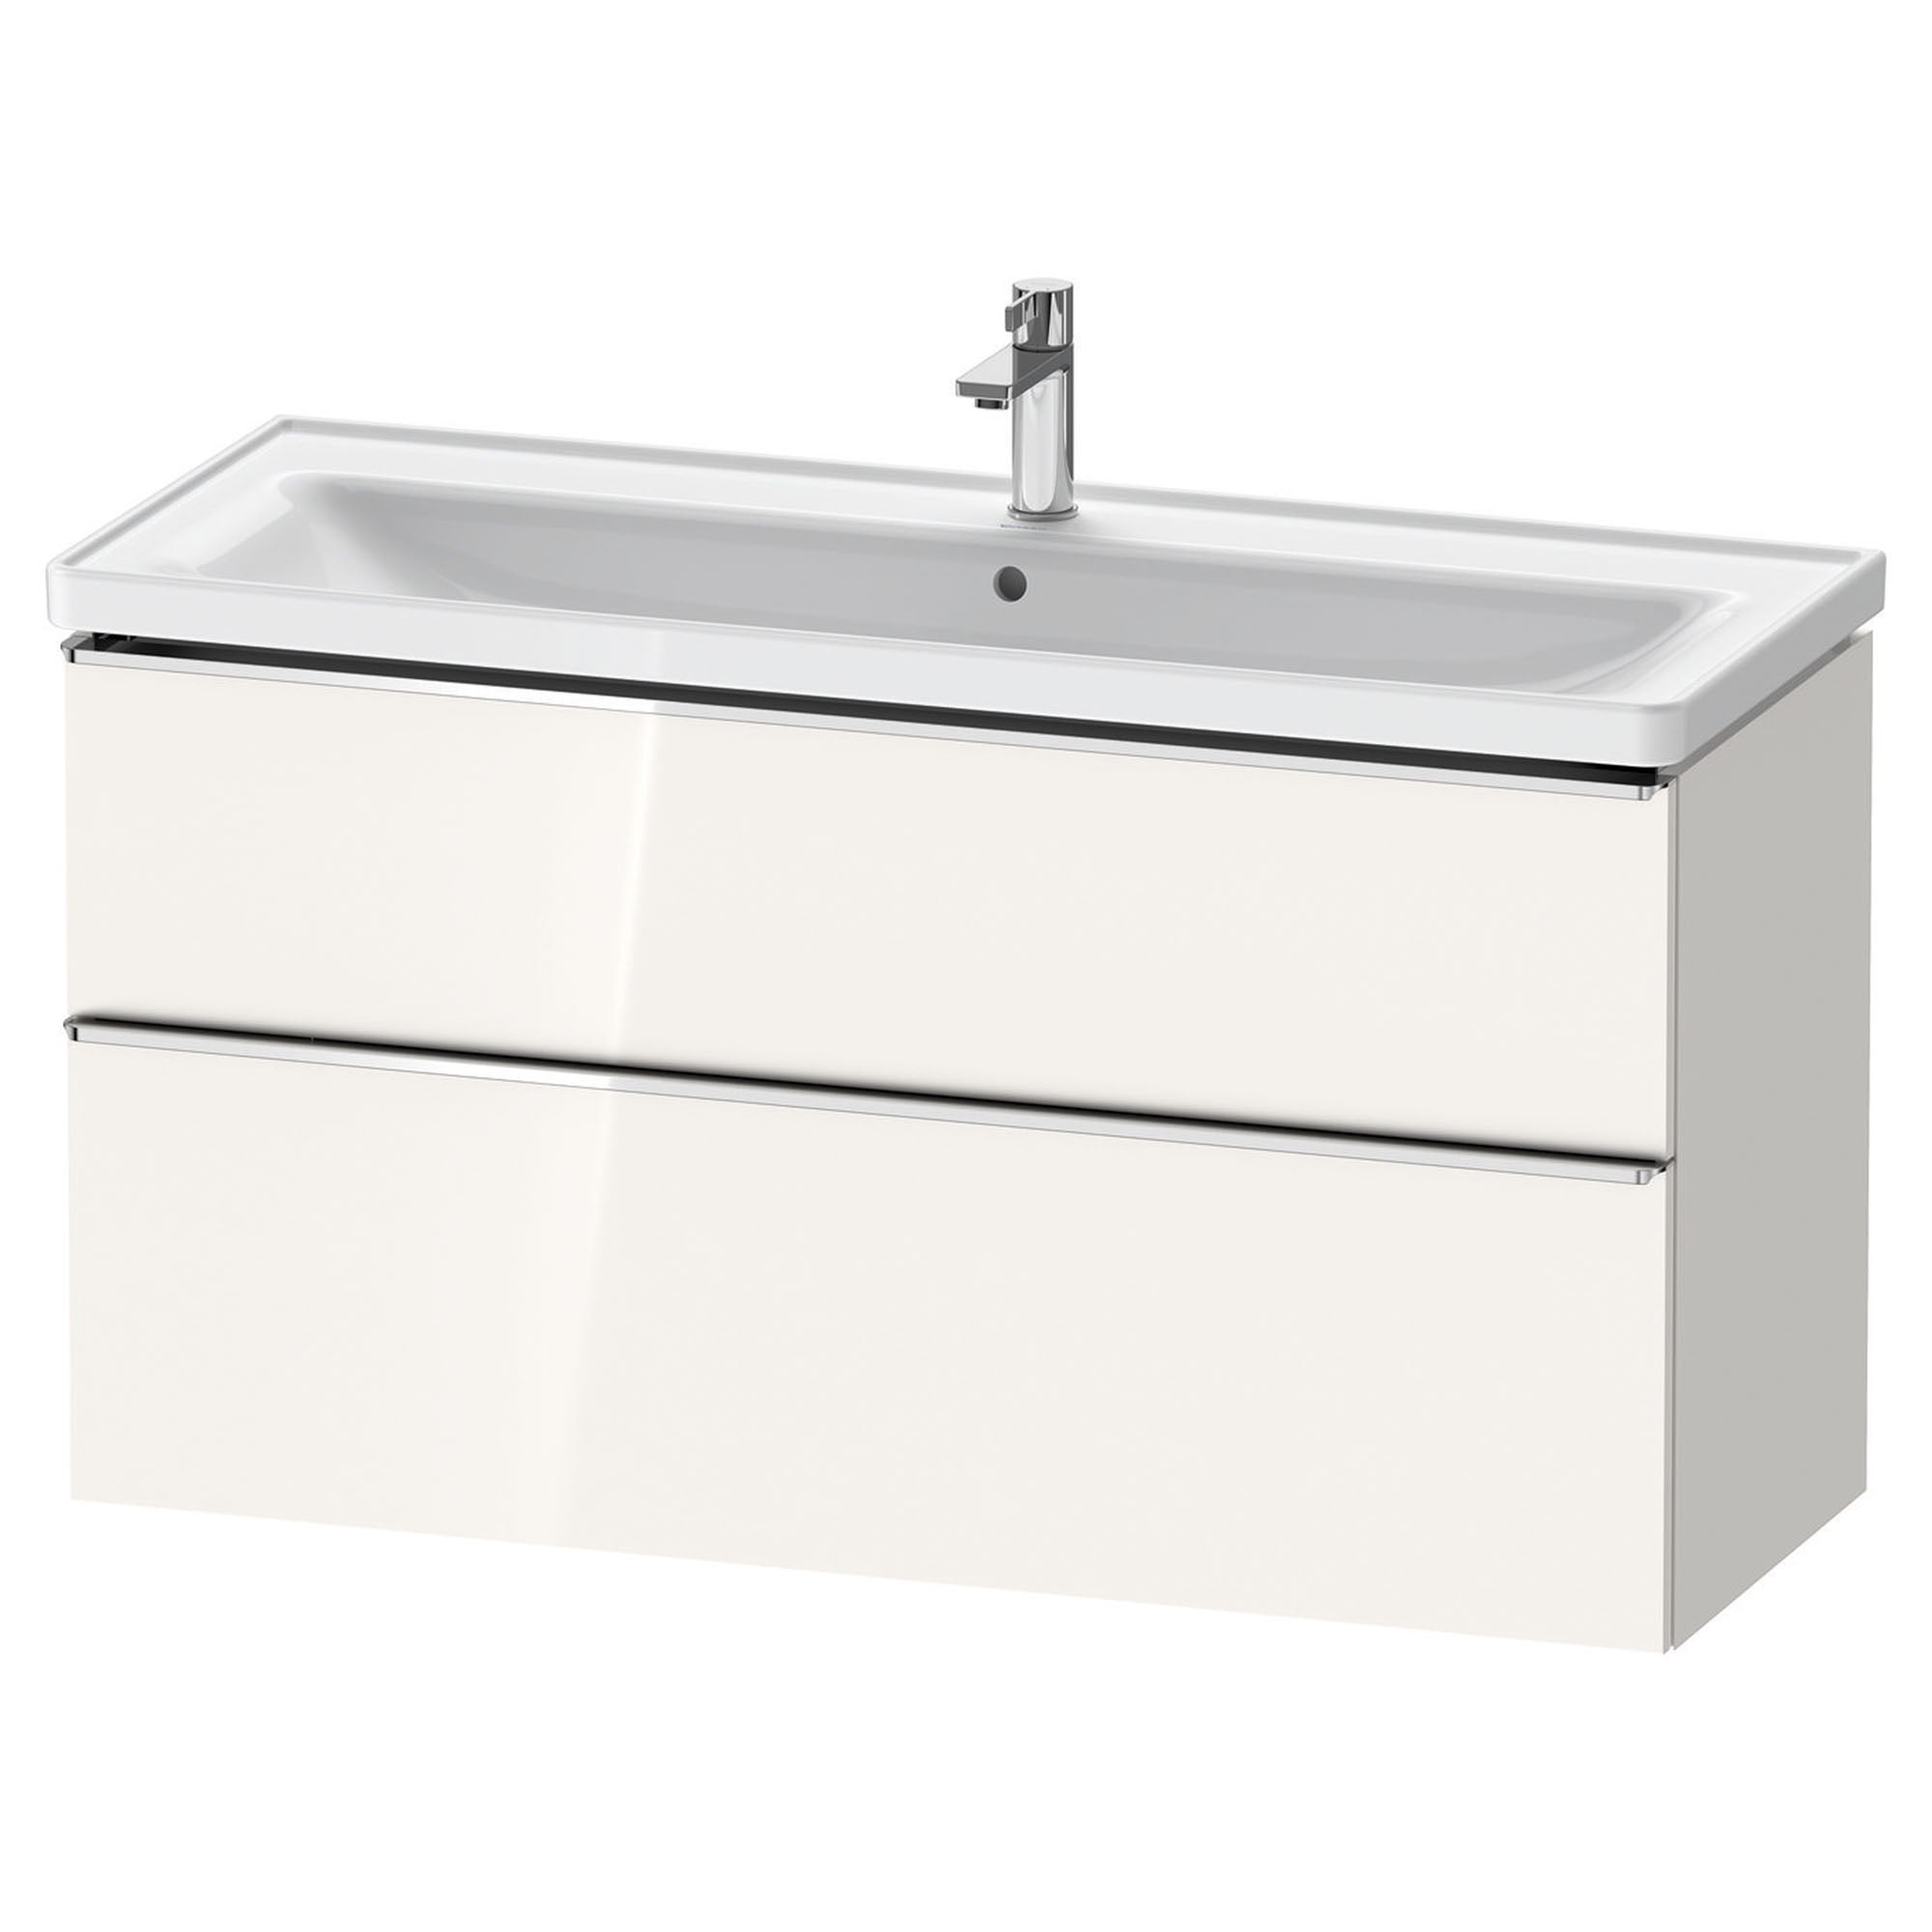 duravit d-neo 1200mm wall mounted vanity unit with d-neo basin gloss white chrome handles